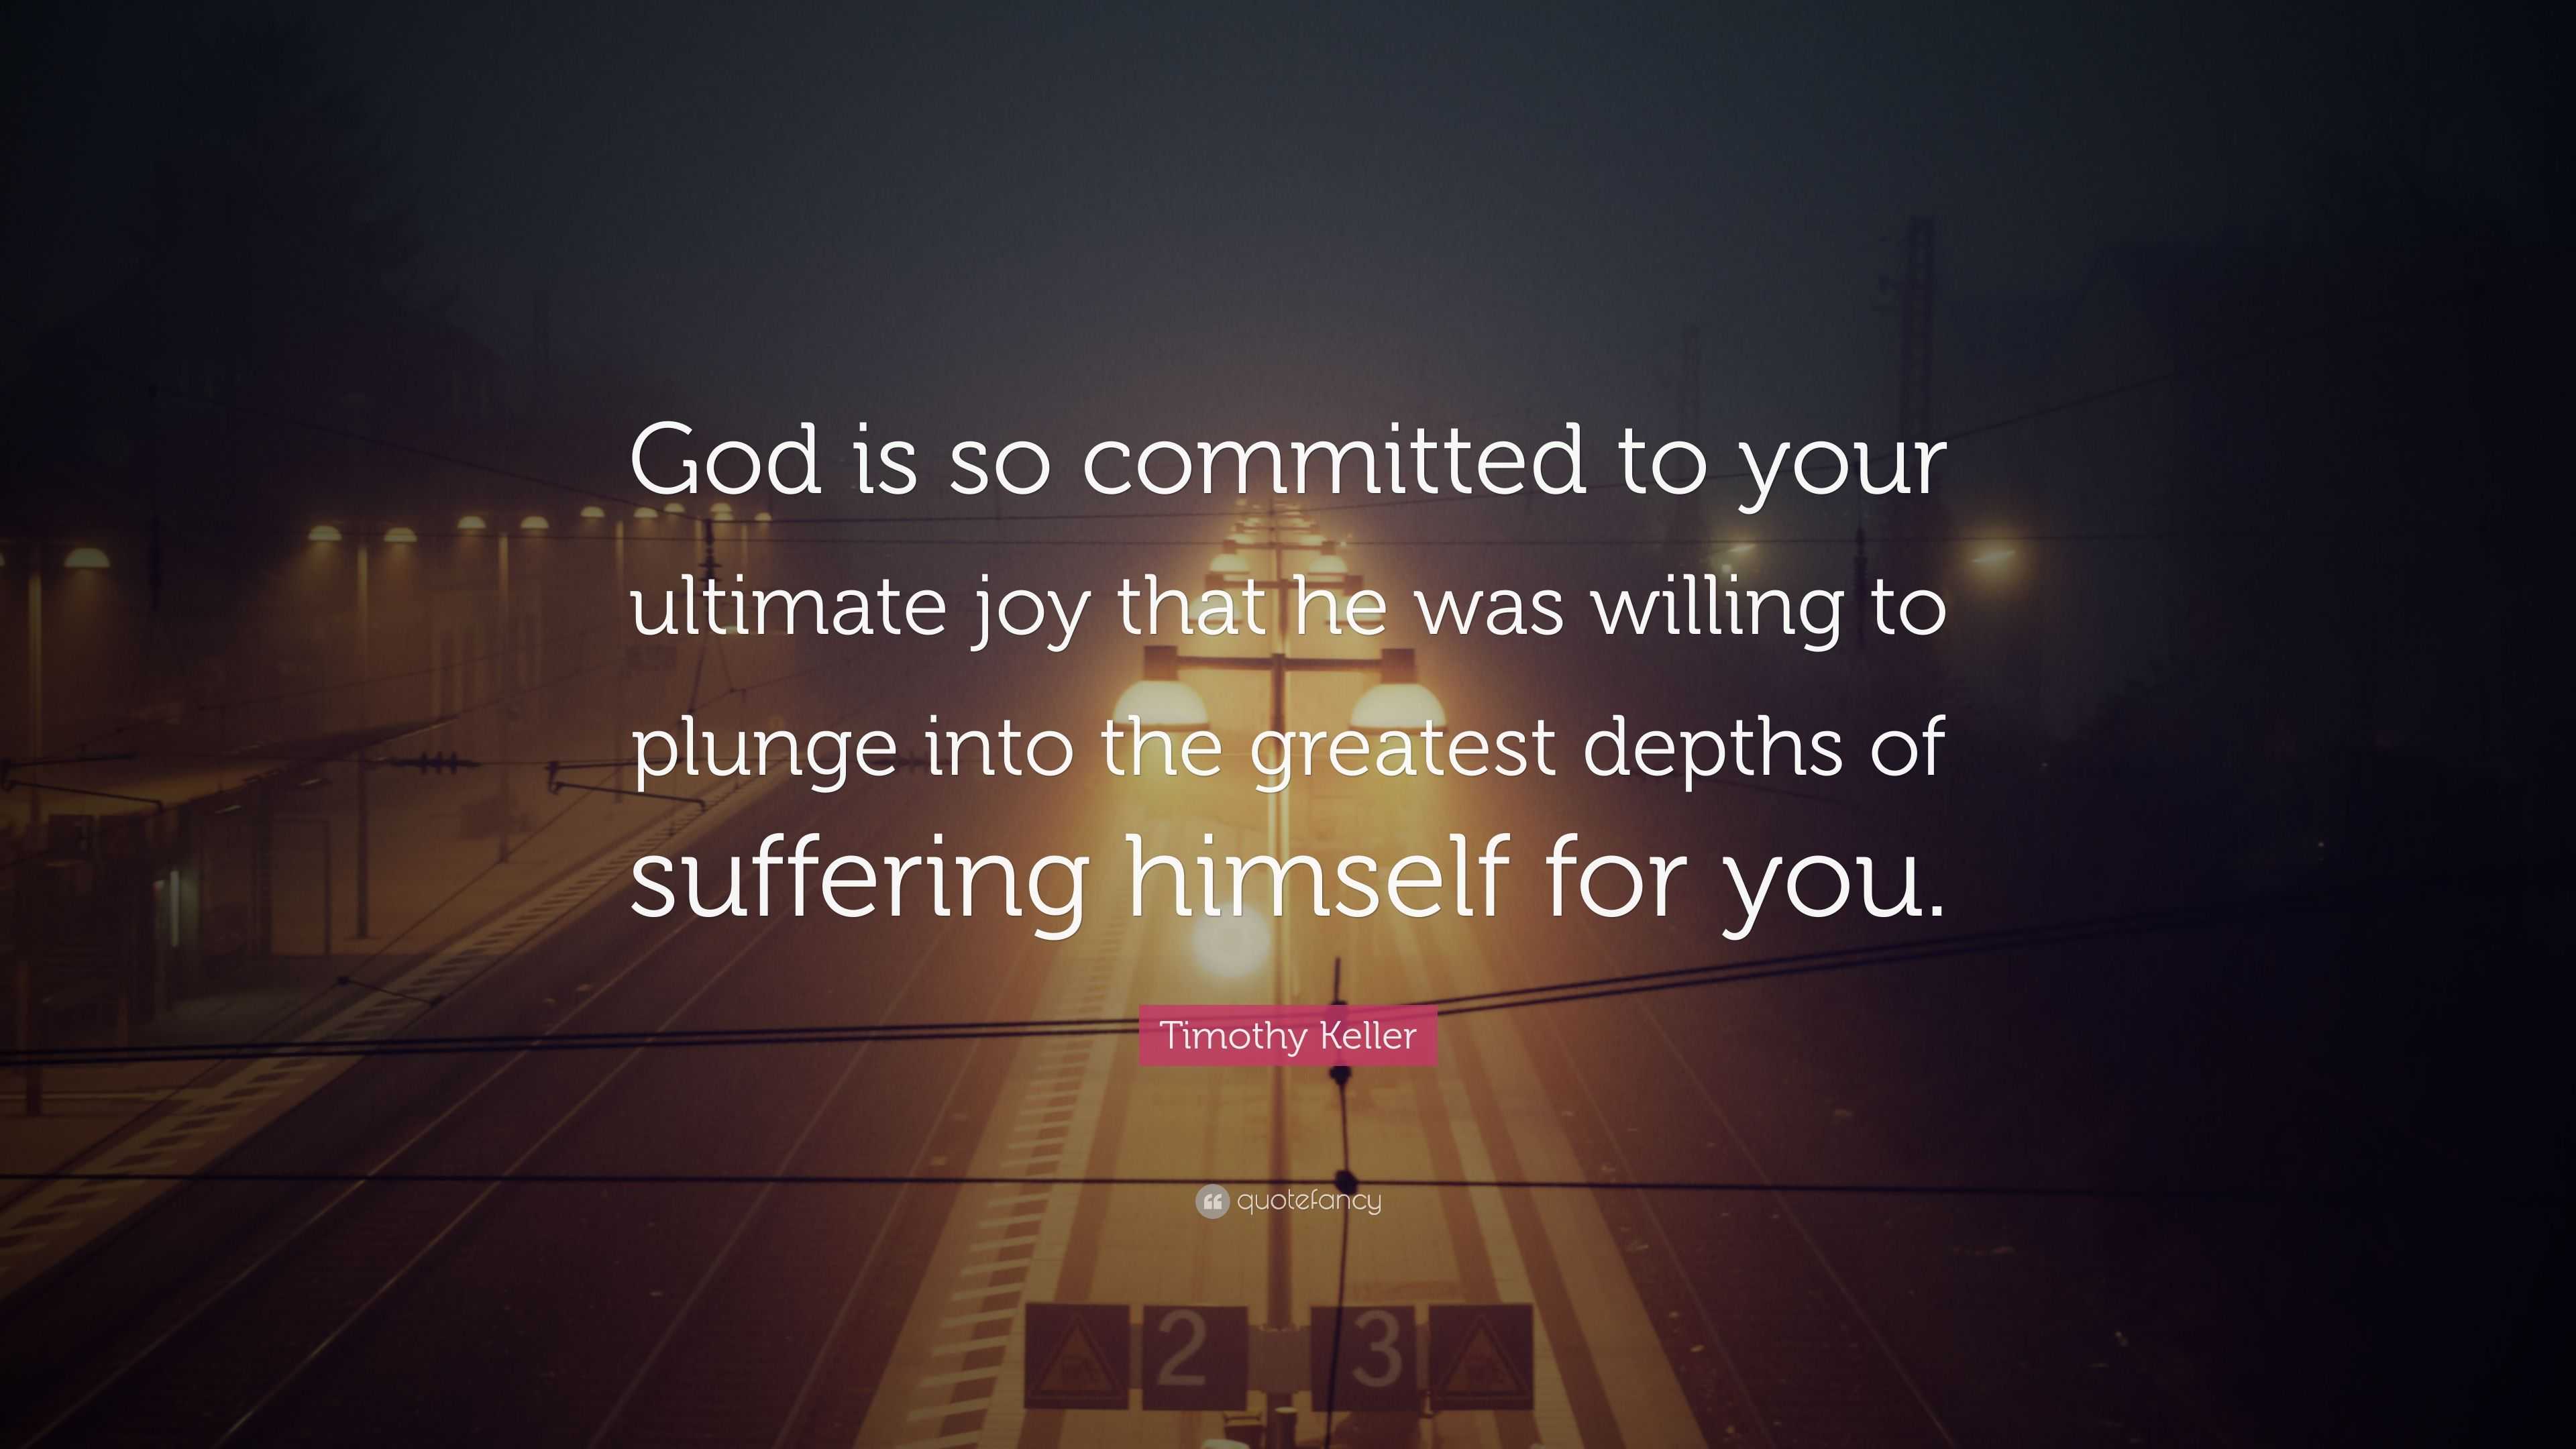 Timothy Keller Quote “god Is So Committed To Your Ultimate Joy That He